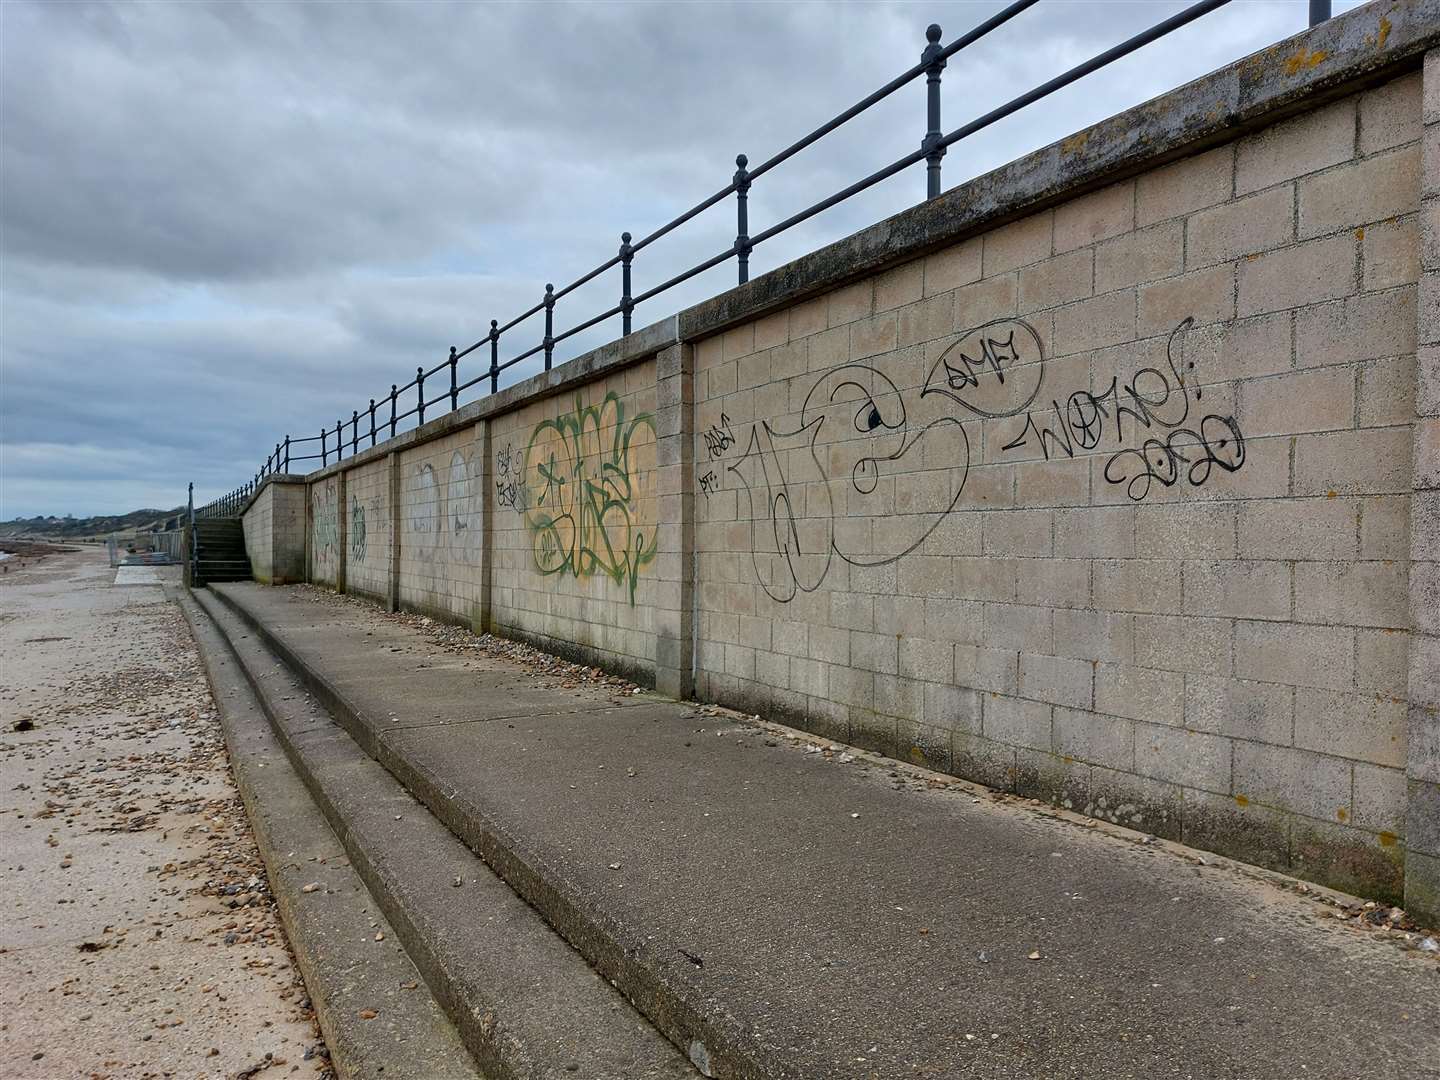 Mr Goodwin says the area's graffiti problem is "worse than ever"